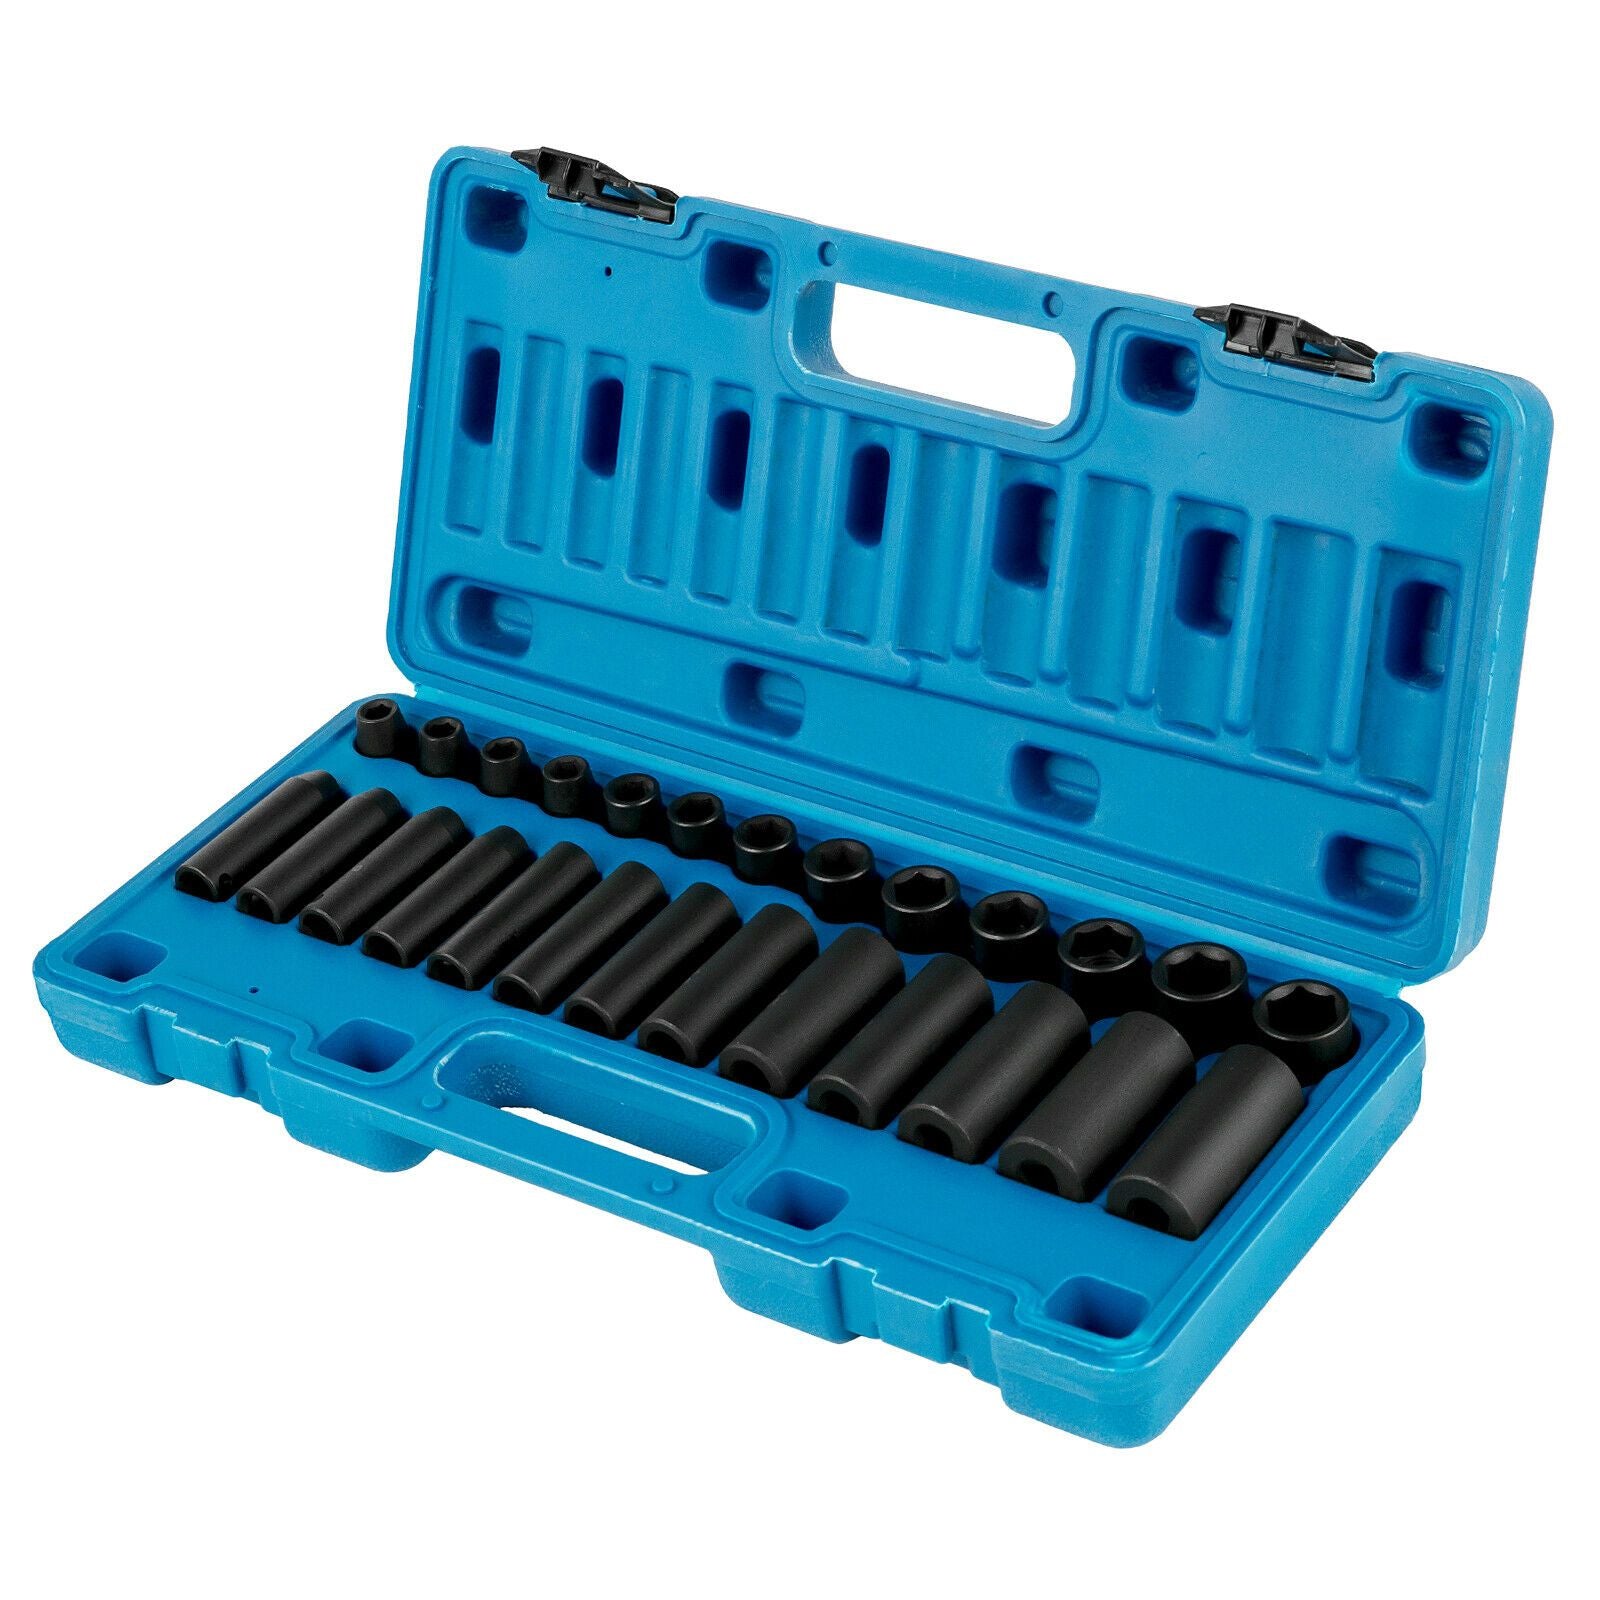 Ultimate 6 Point Wrench Metric Impact Socket Set 3/8" - Westfield Retailers